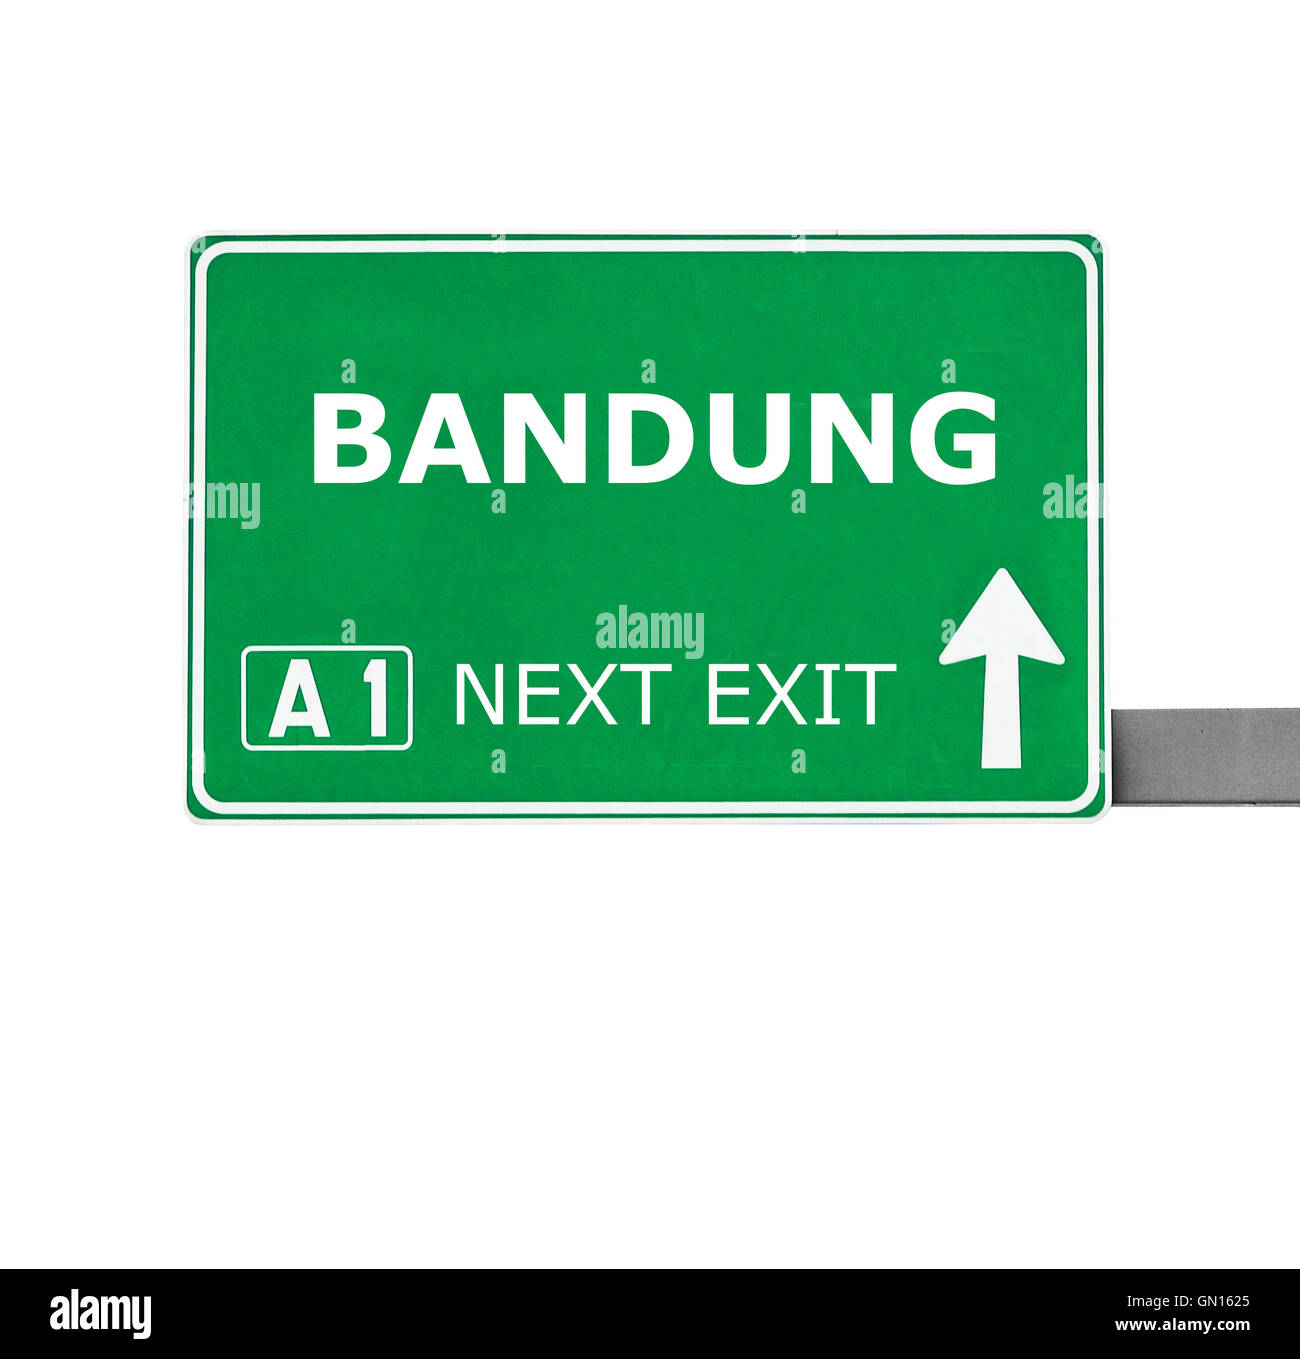 BANDUNG road sign isolated on white Stock Photo